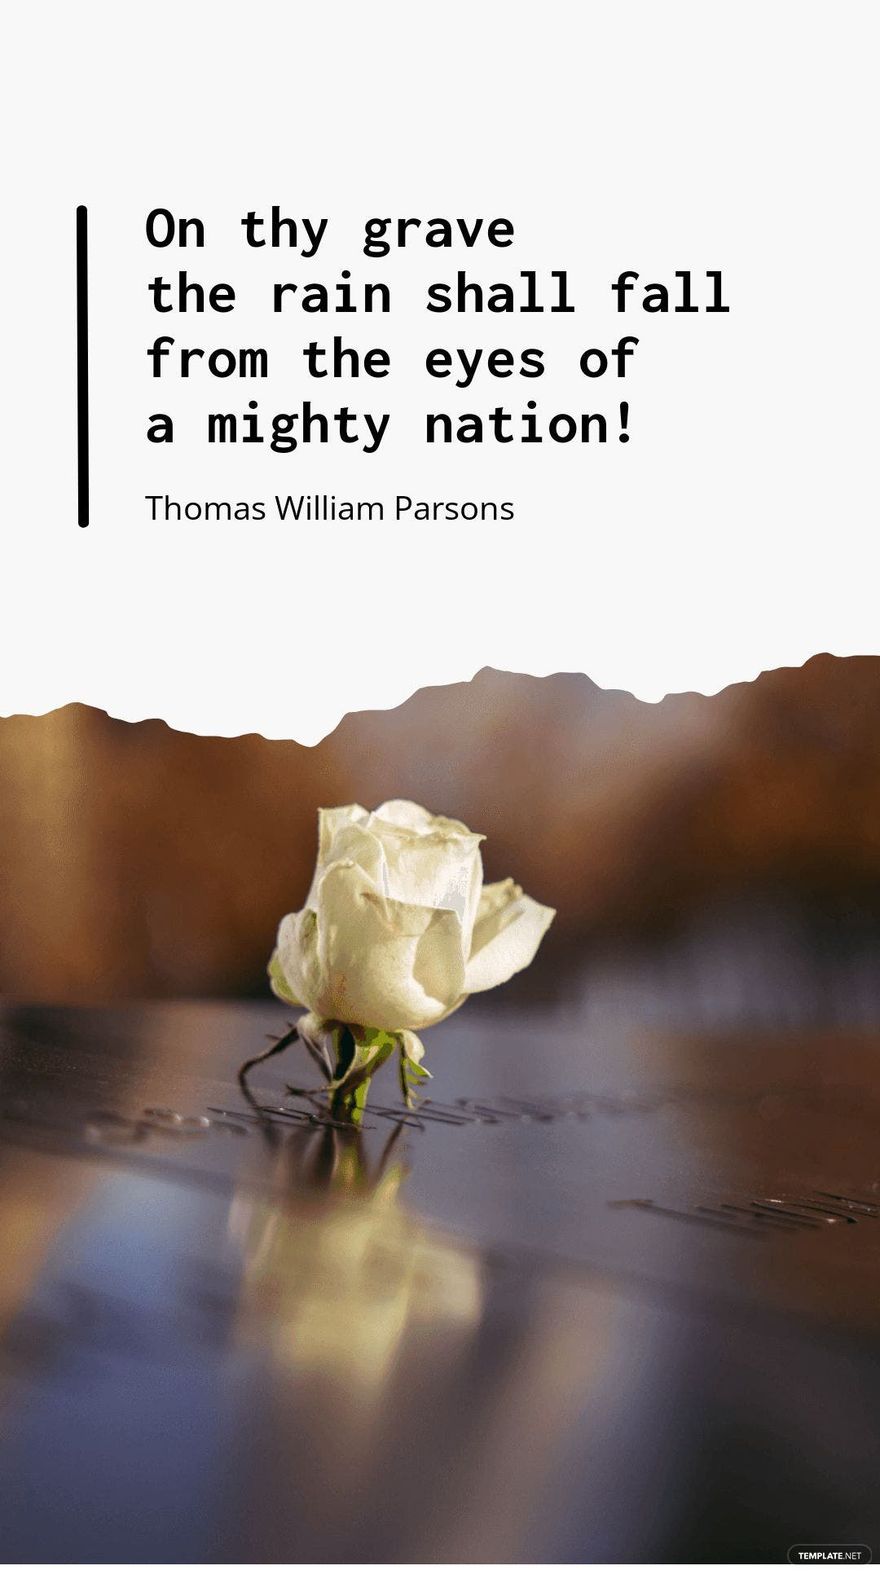 Thomas William Parsons - On thy grave the rain shall fall from the eyes of a mighty nation! in JPG